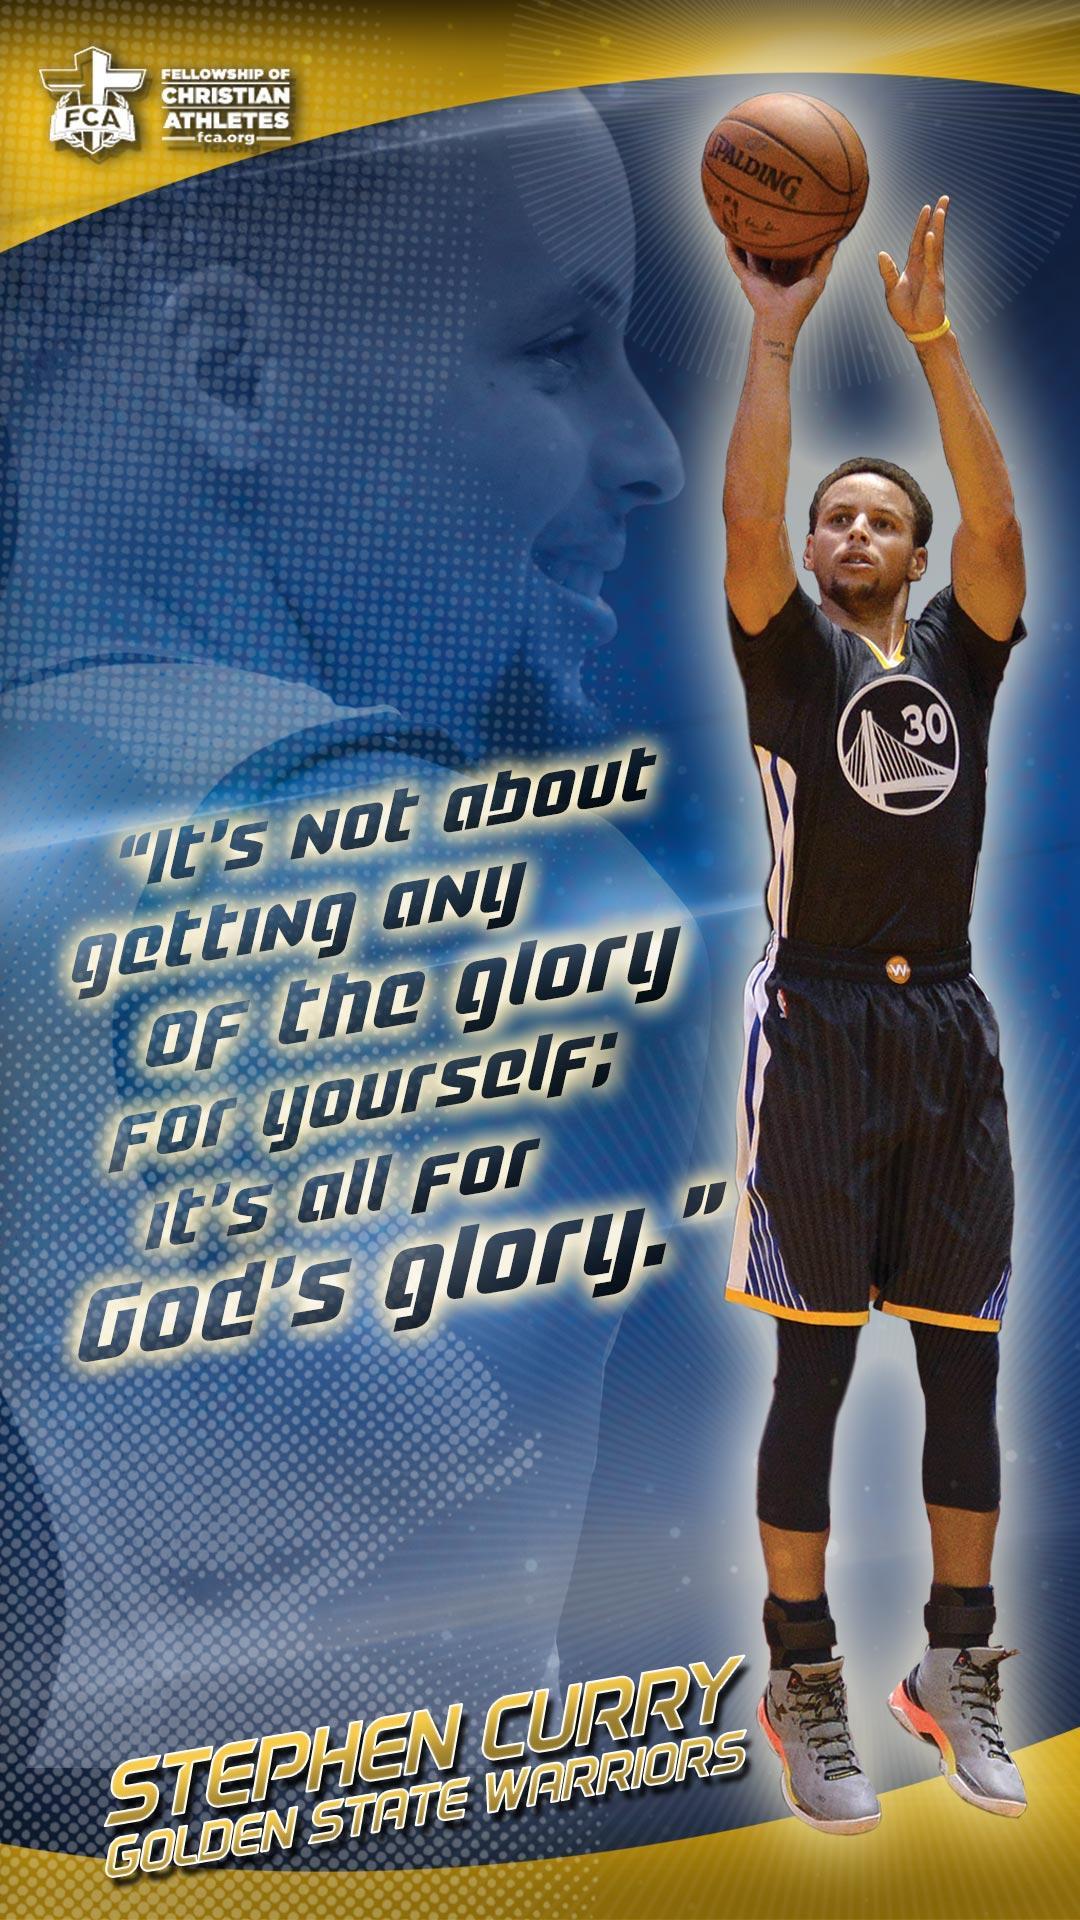 Stephen Curry Wallpaper For Iphone - Stephen Curry Nba is free on  Elsetge.cat. Please download and sh…